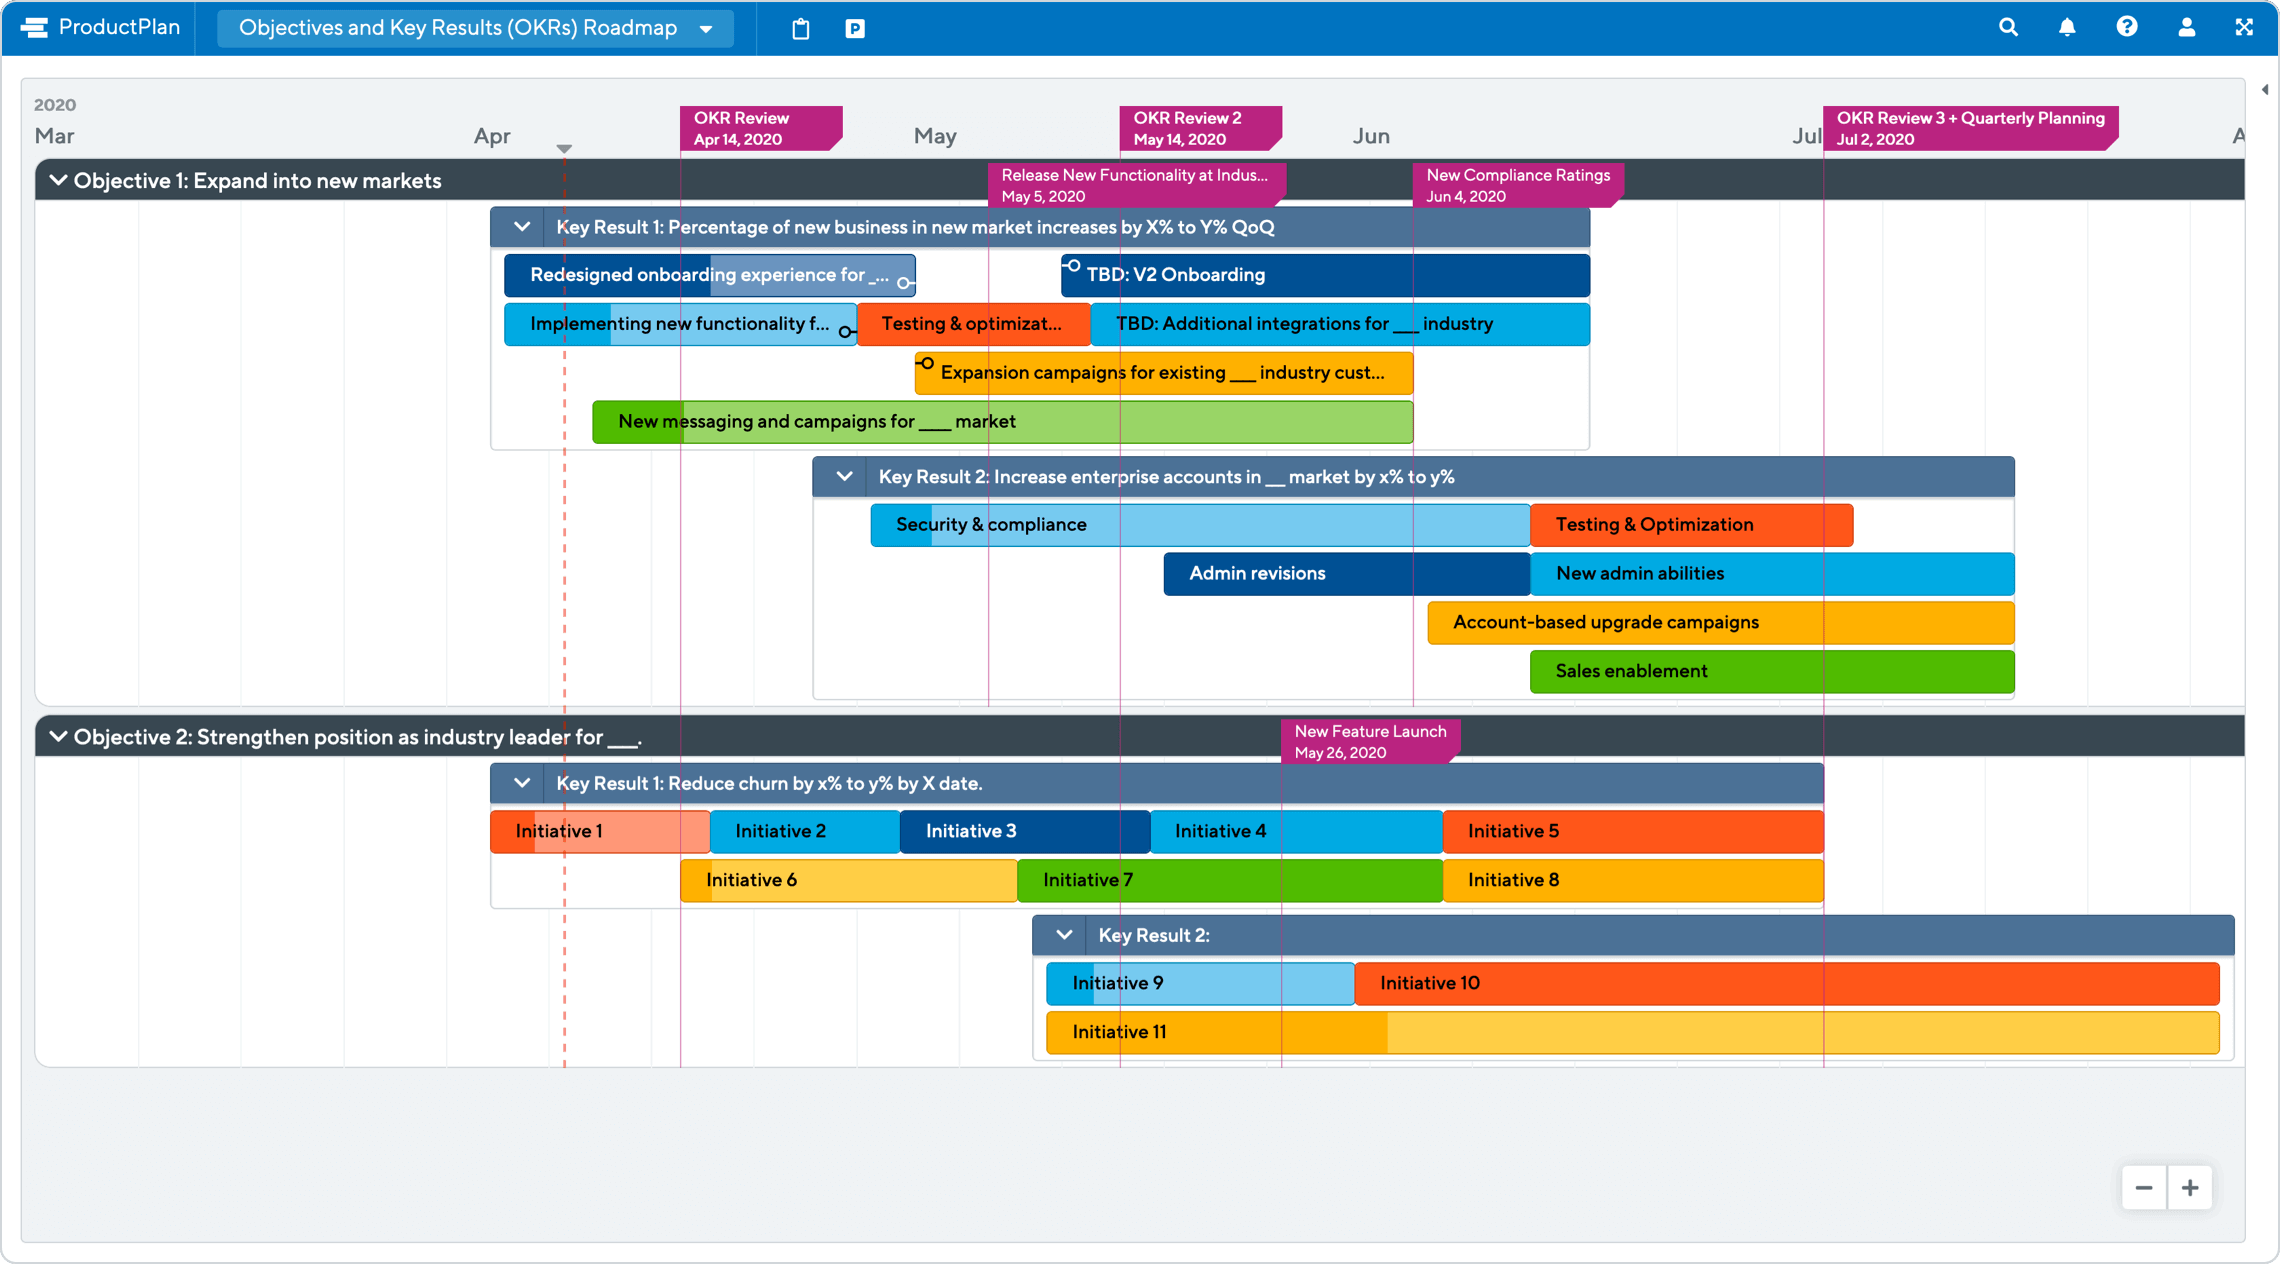 OKR Roadmap Template by ProductPlan